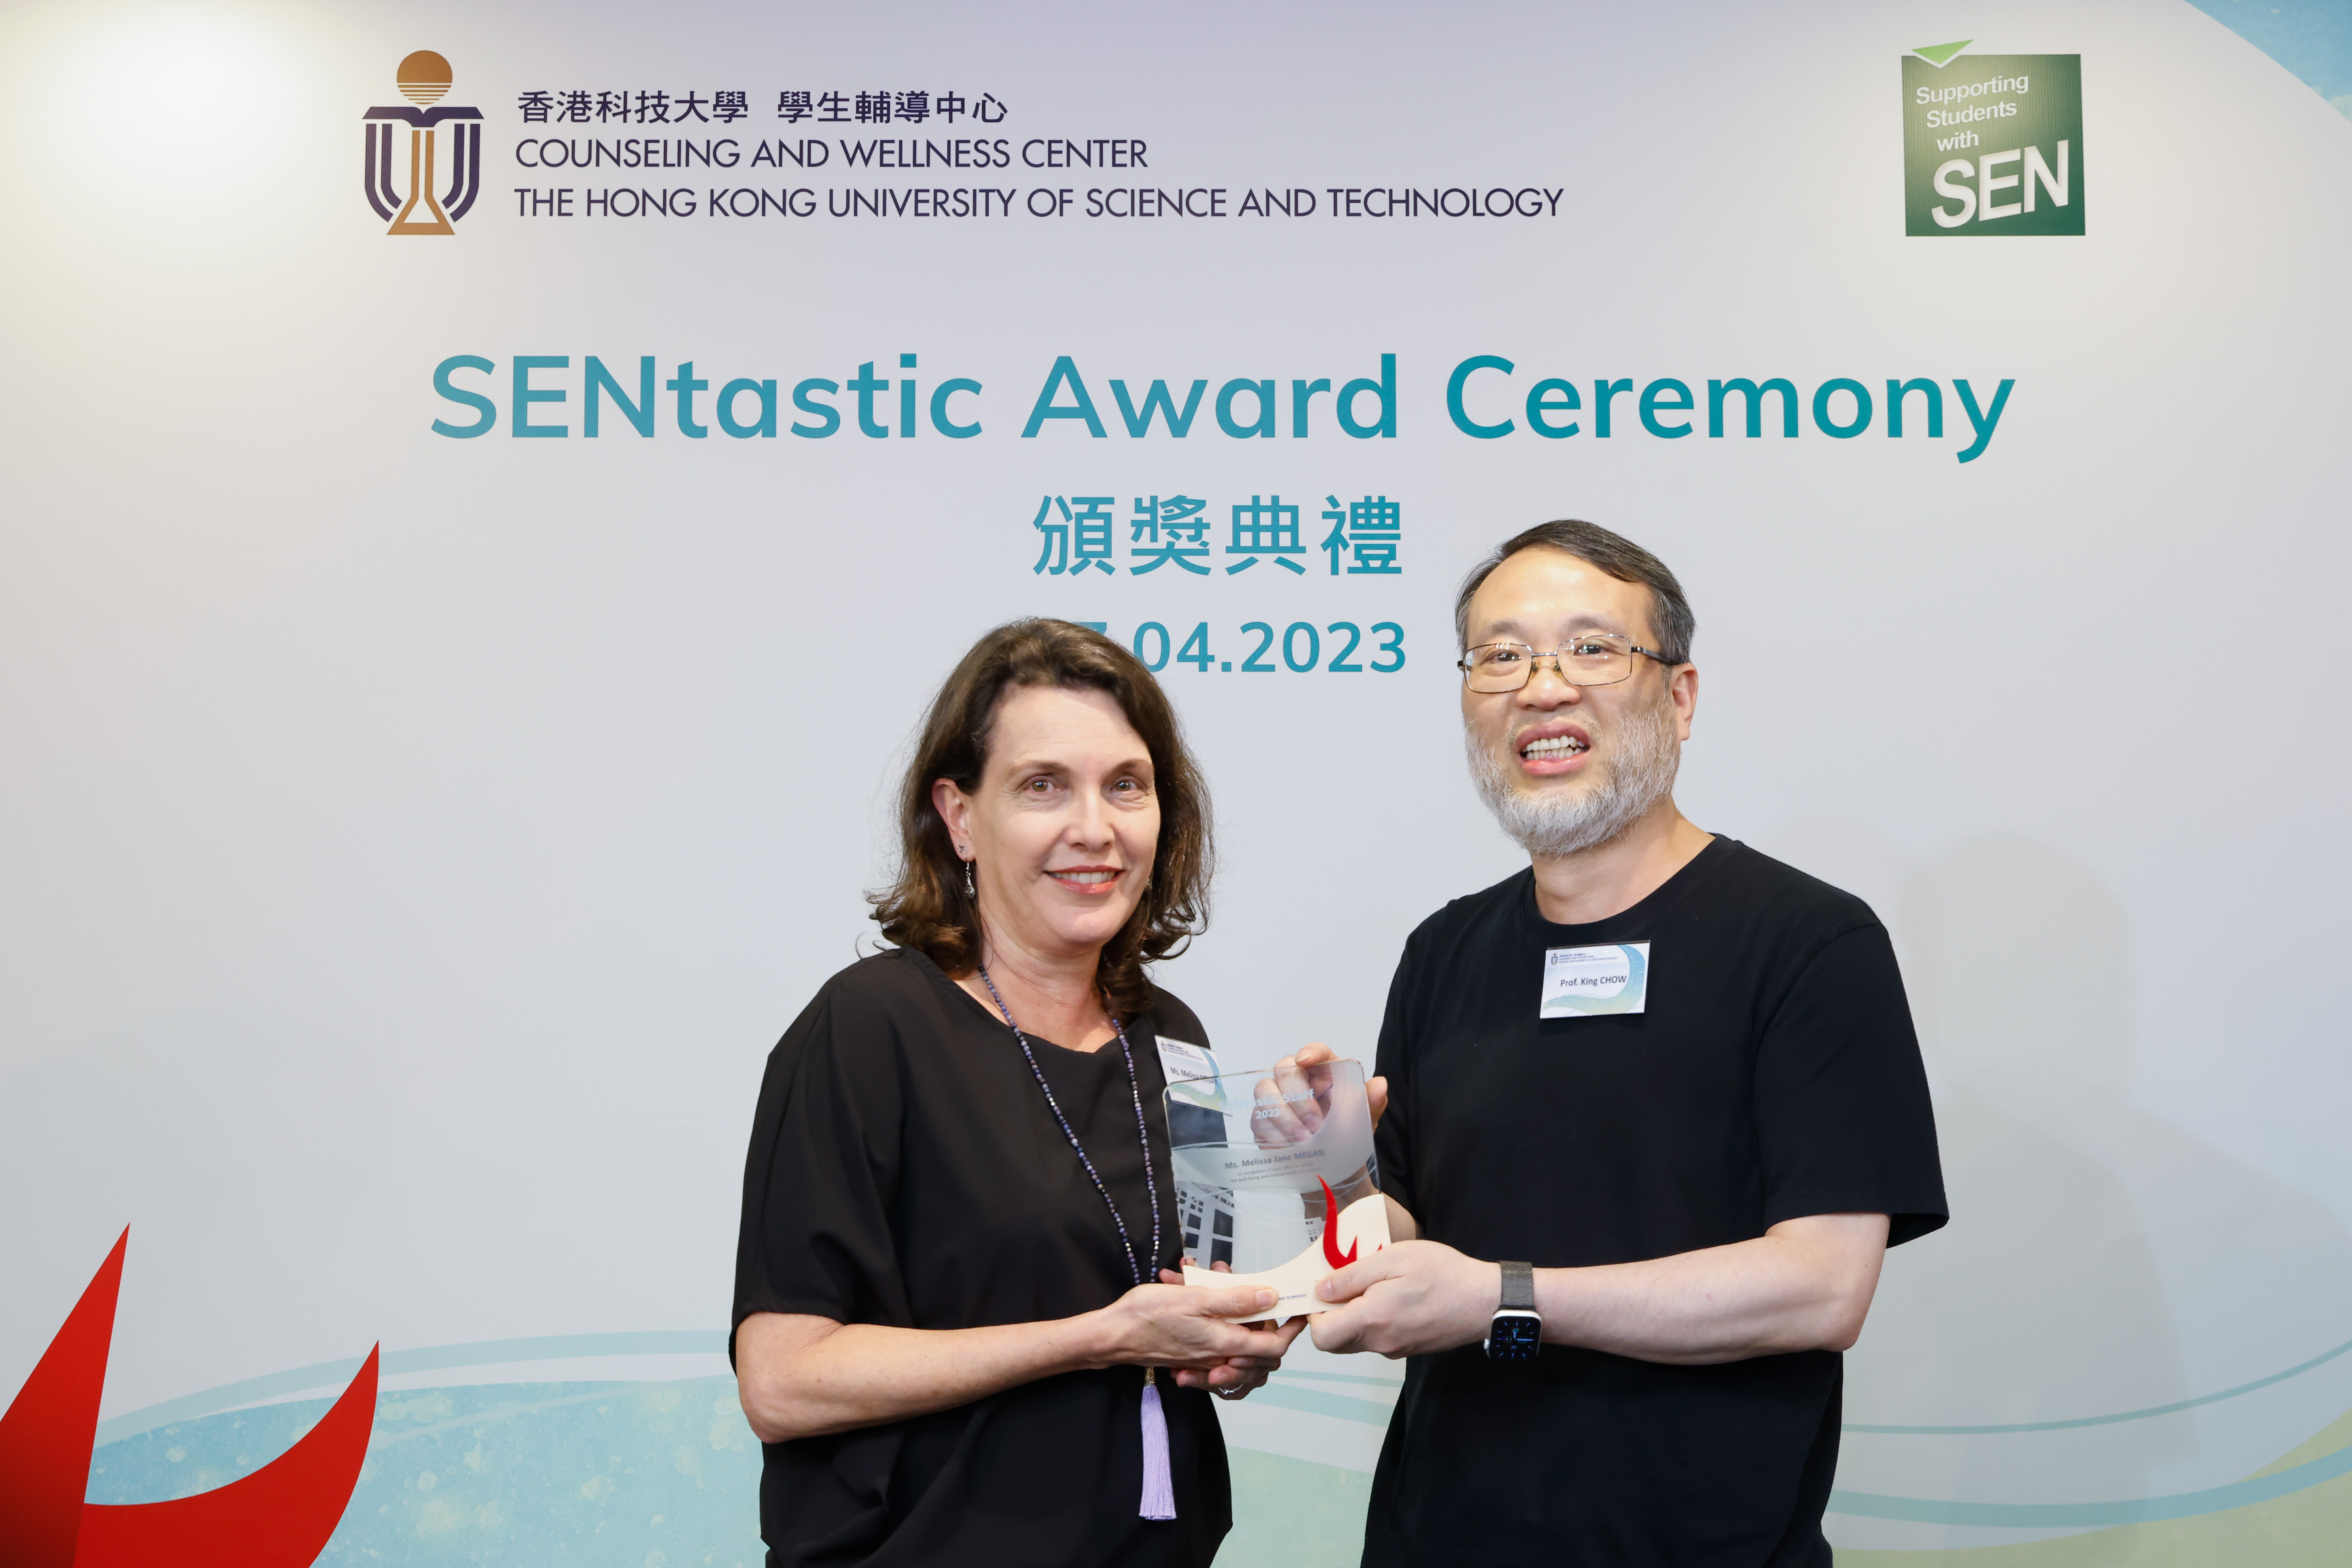 Melissa Megan receives her SENtastic Award from Prof. King CHOW, the Acting Dean of Students.